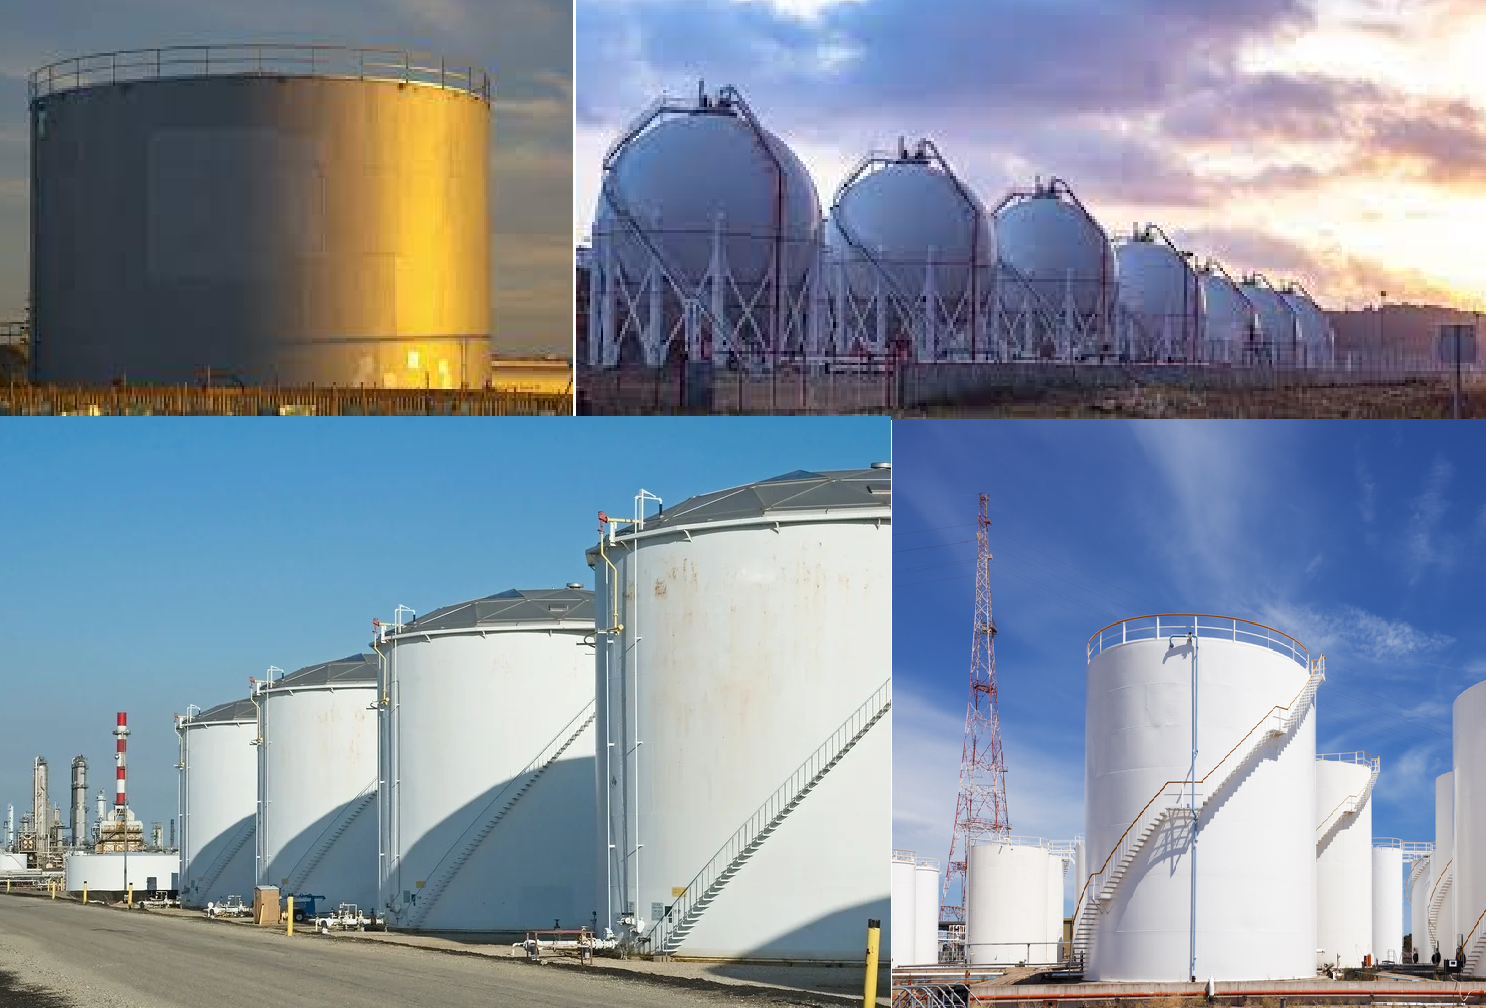 Storage Tanks Types & Technical Requirements in Refineries